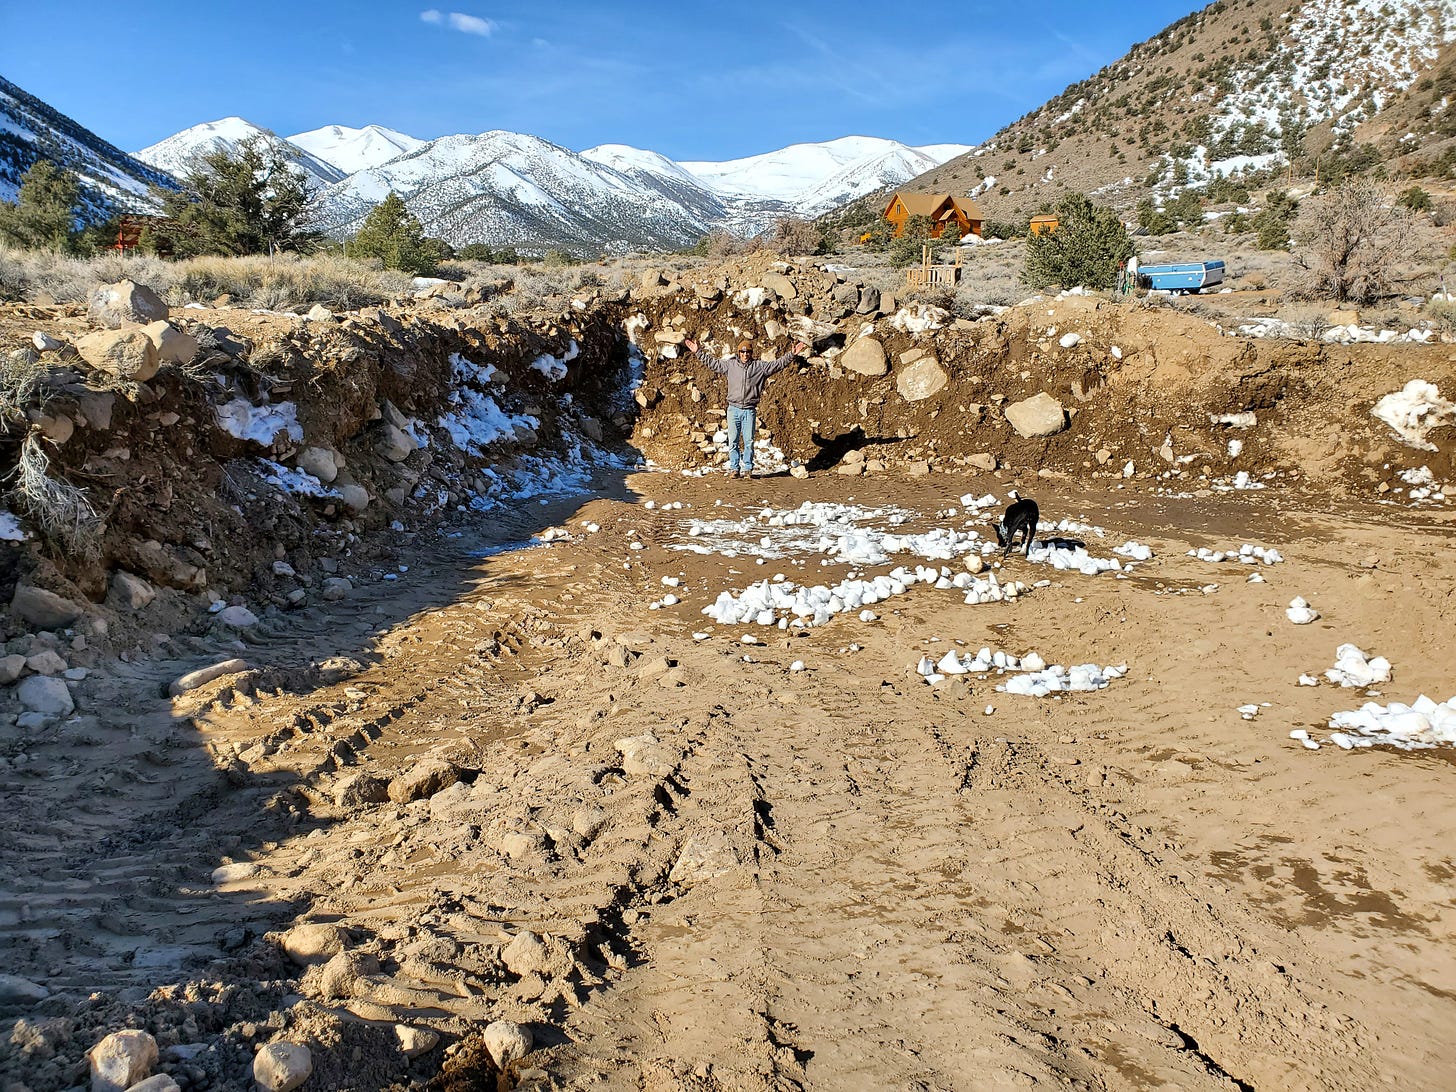 A view of a large excavated hole in the ground. Eric is standing in the far side of the hole with his arms outspread.